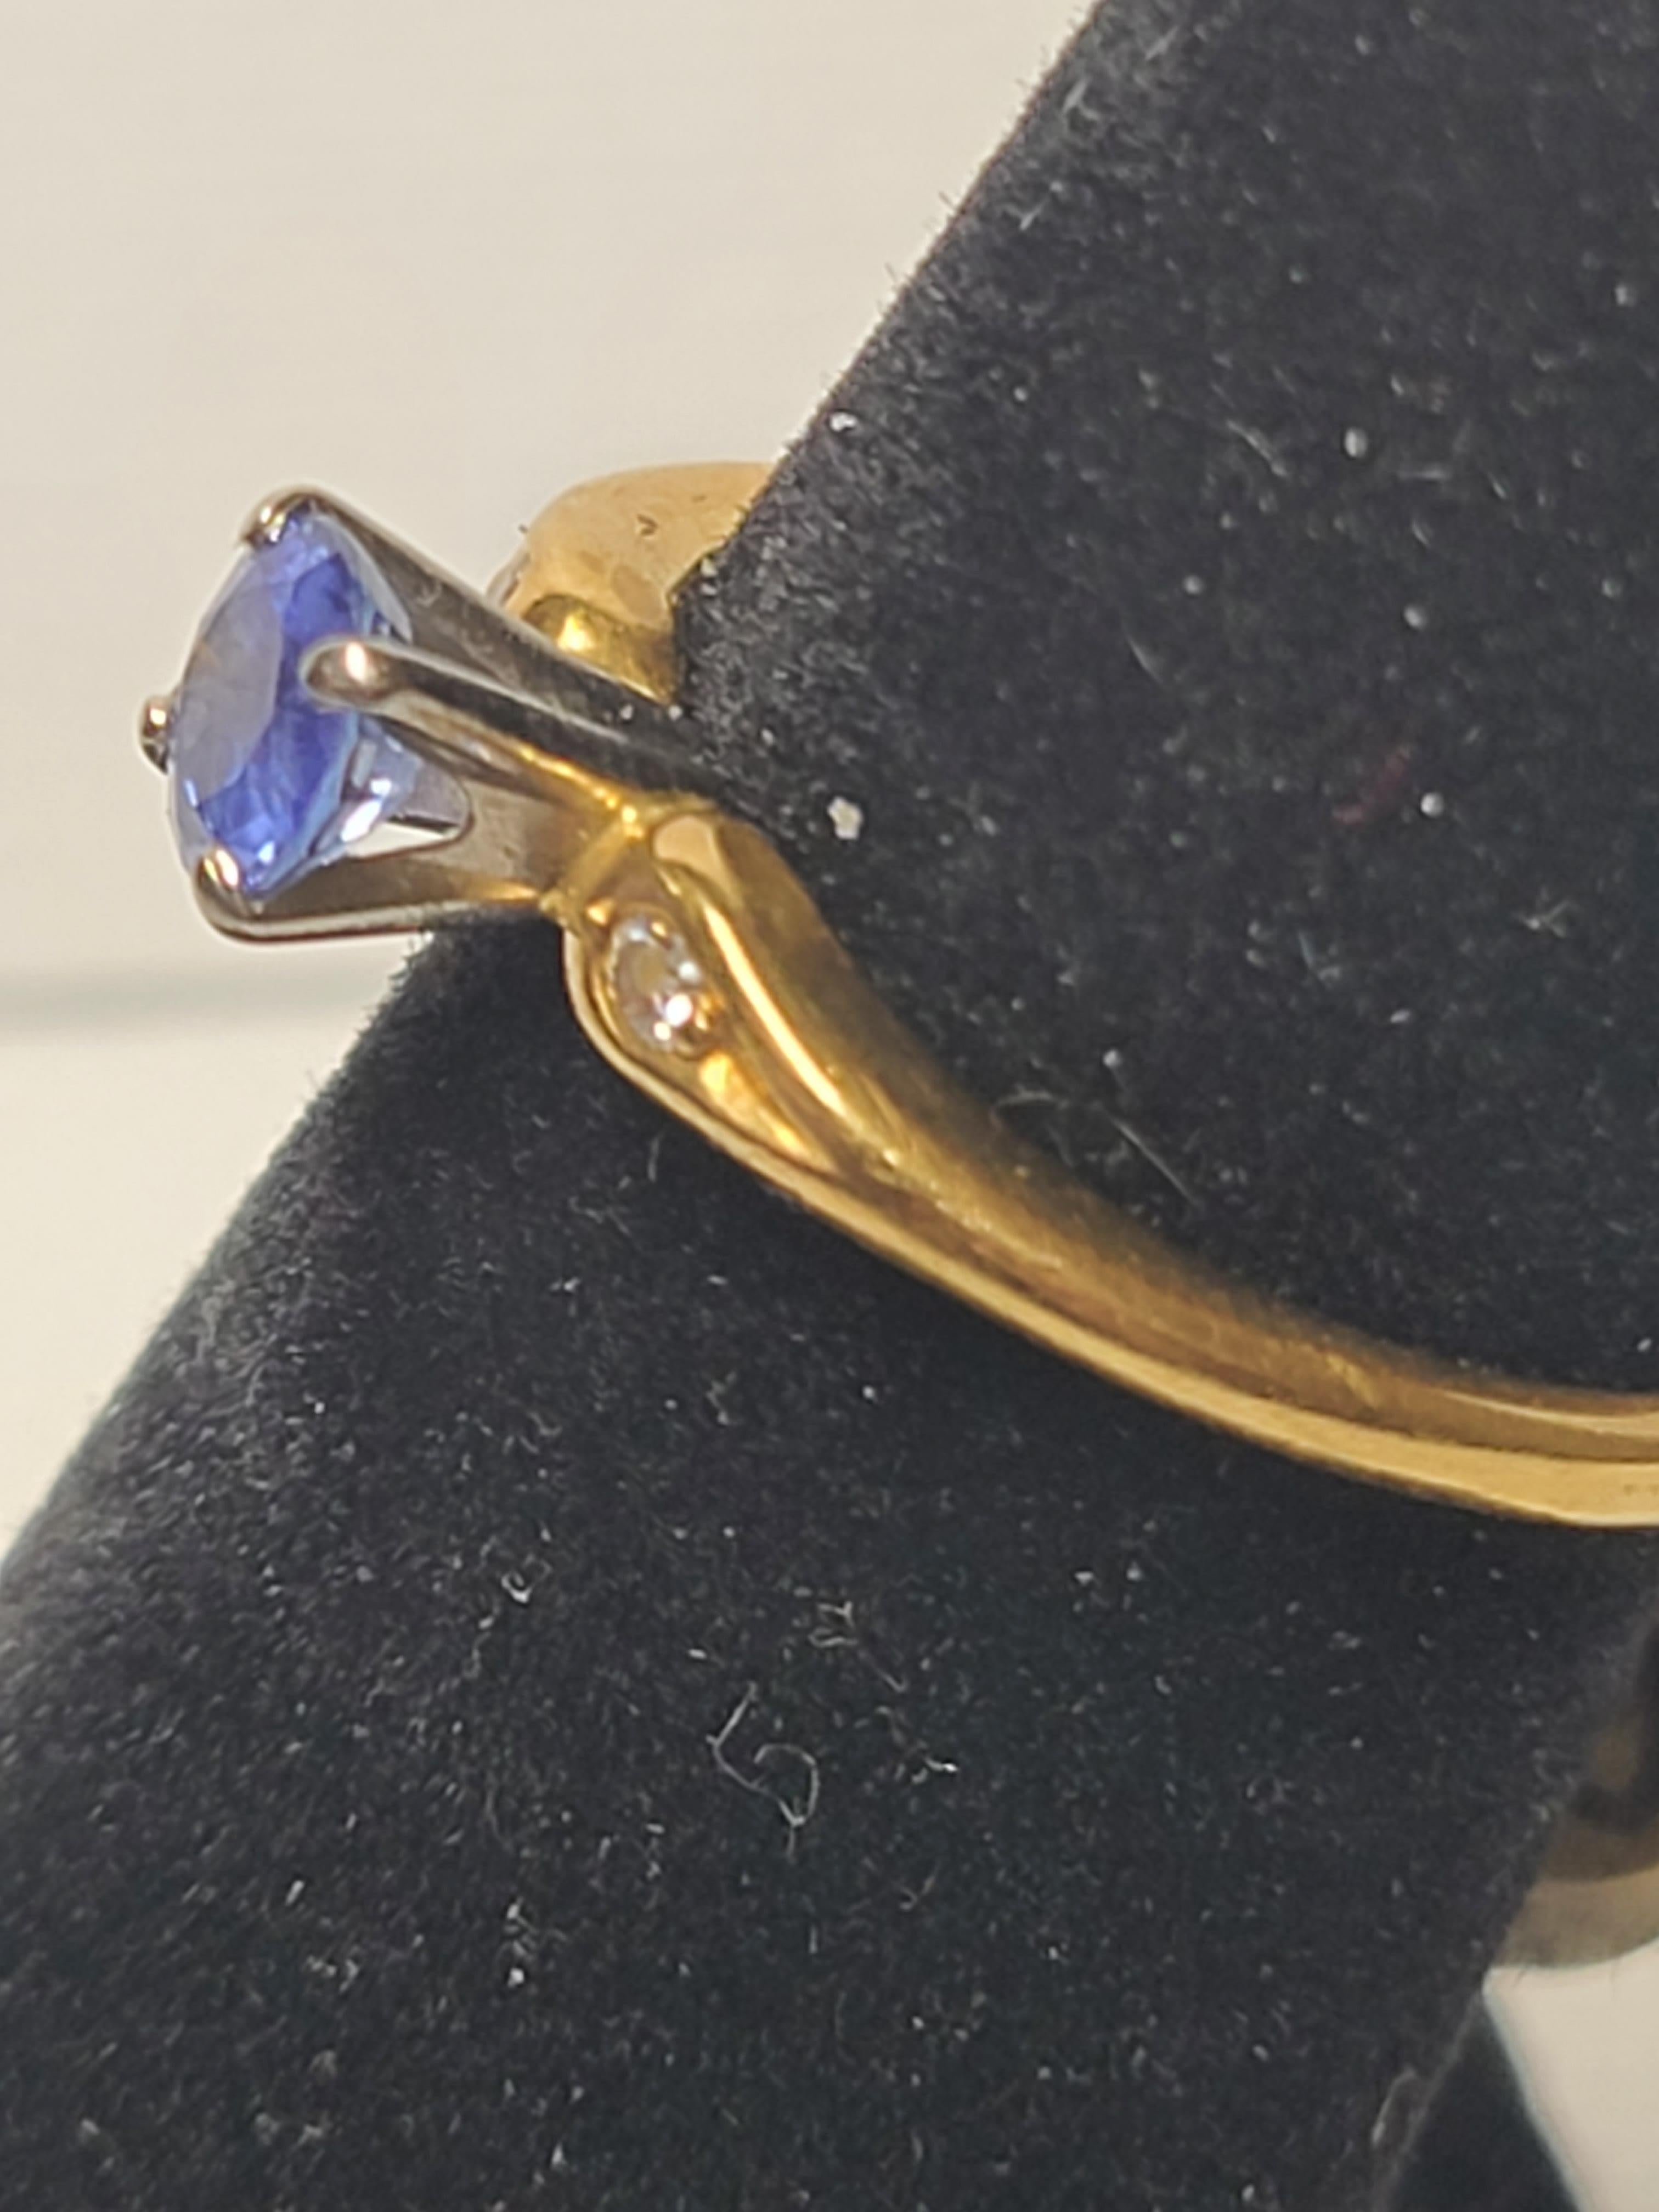 Contemporary Vintage Jabel 18k Yellow Gold Sapphire Ring with Diamond Accents